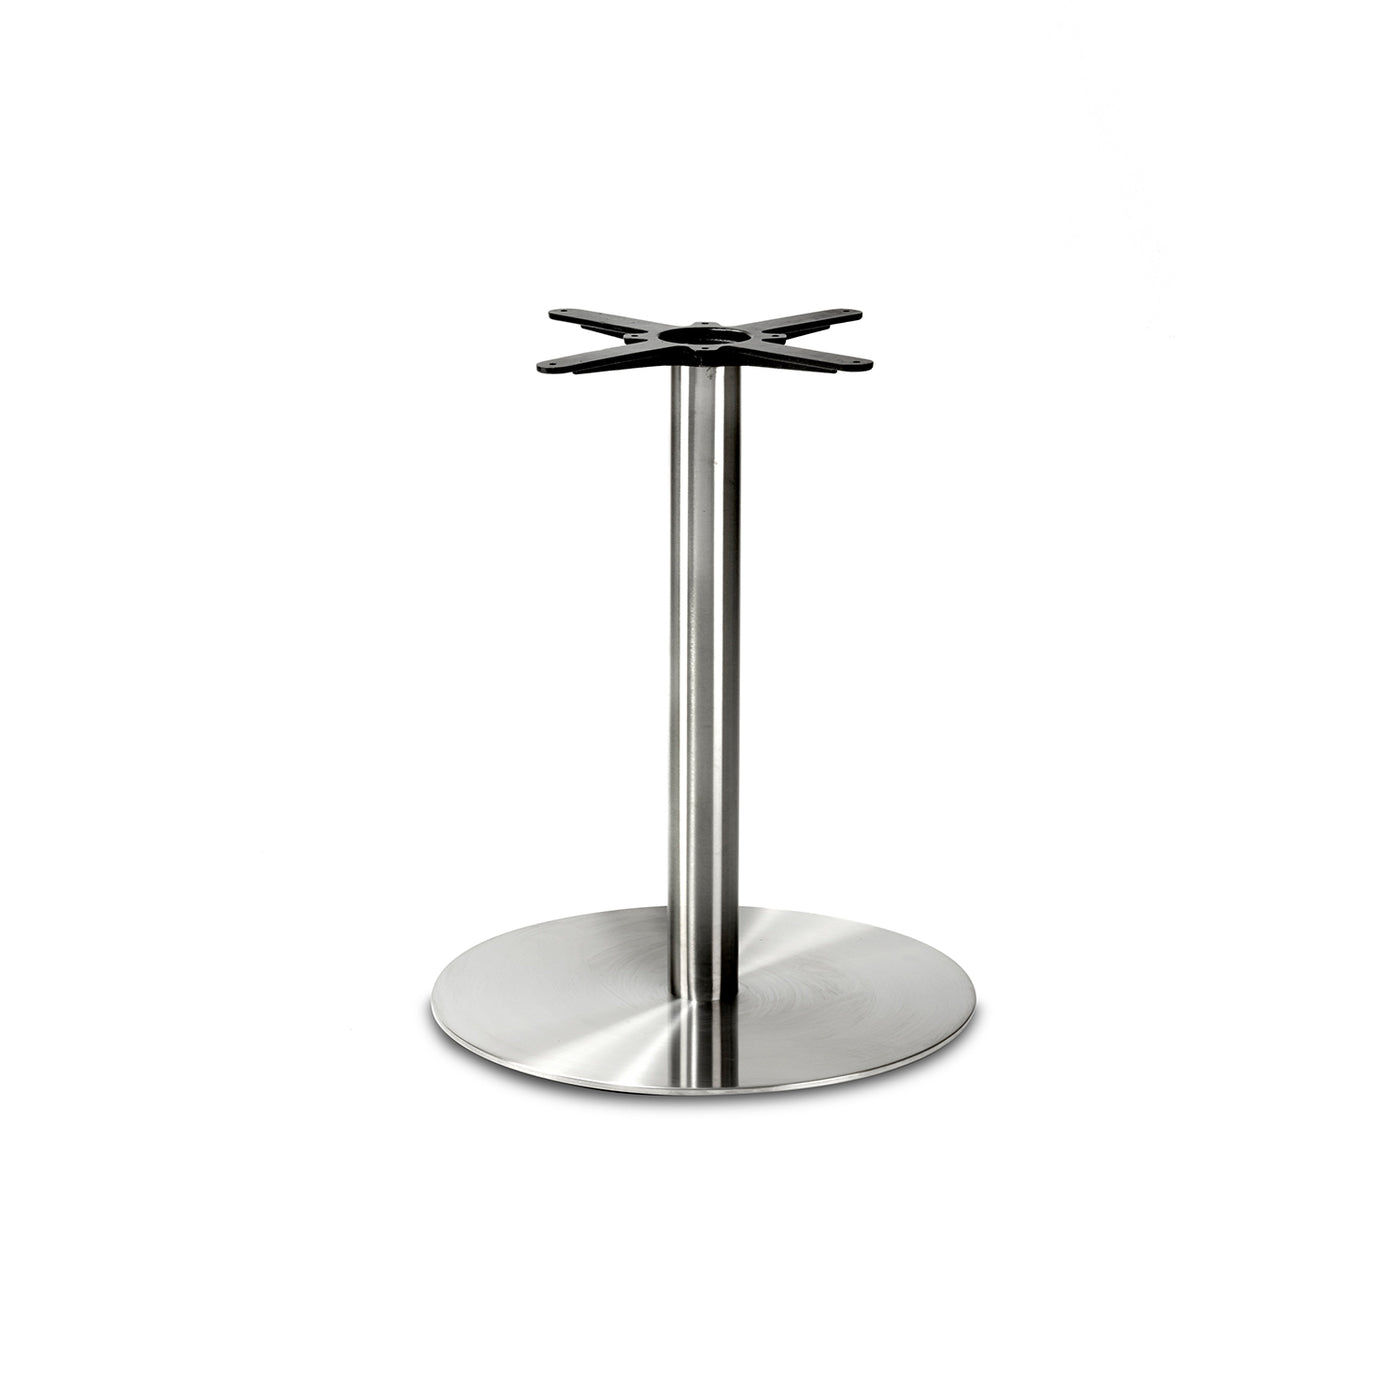 Noah Large Round Table Base - Stainless Steel